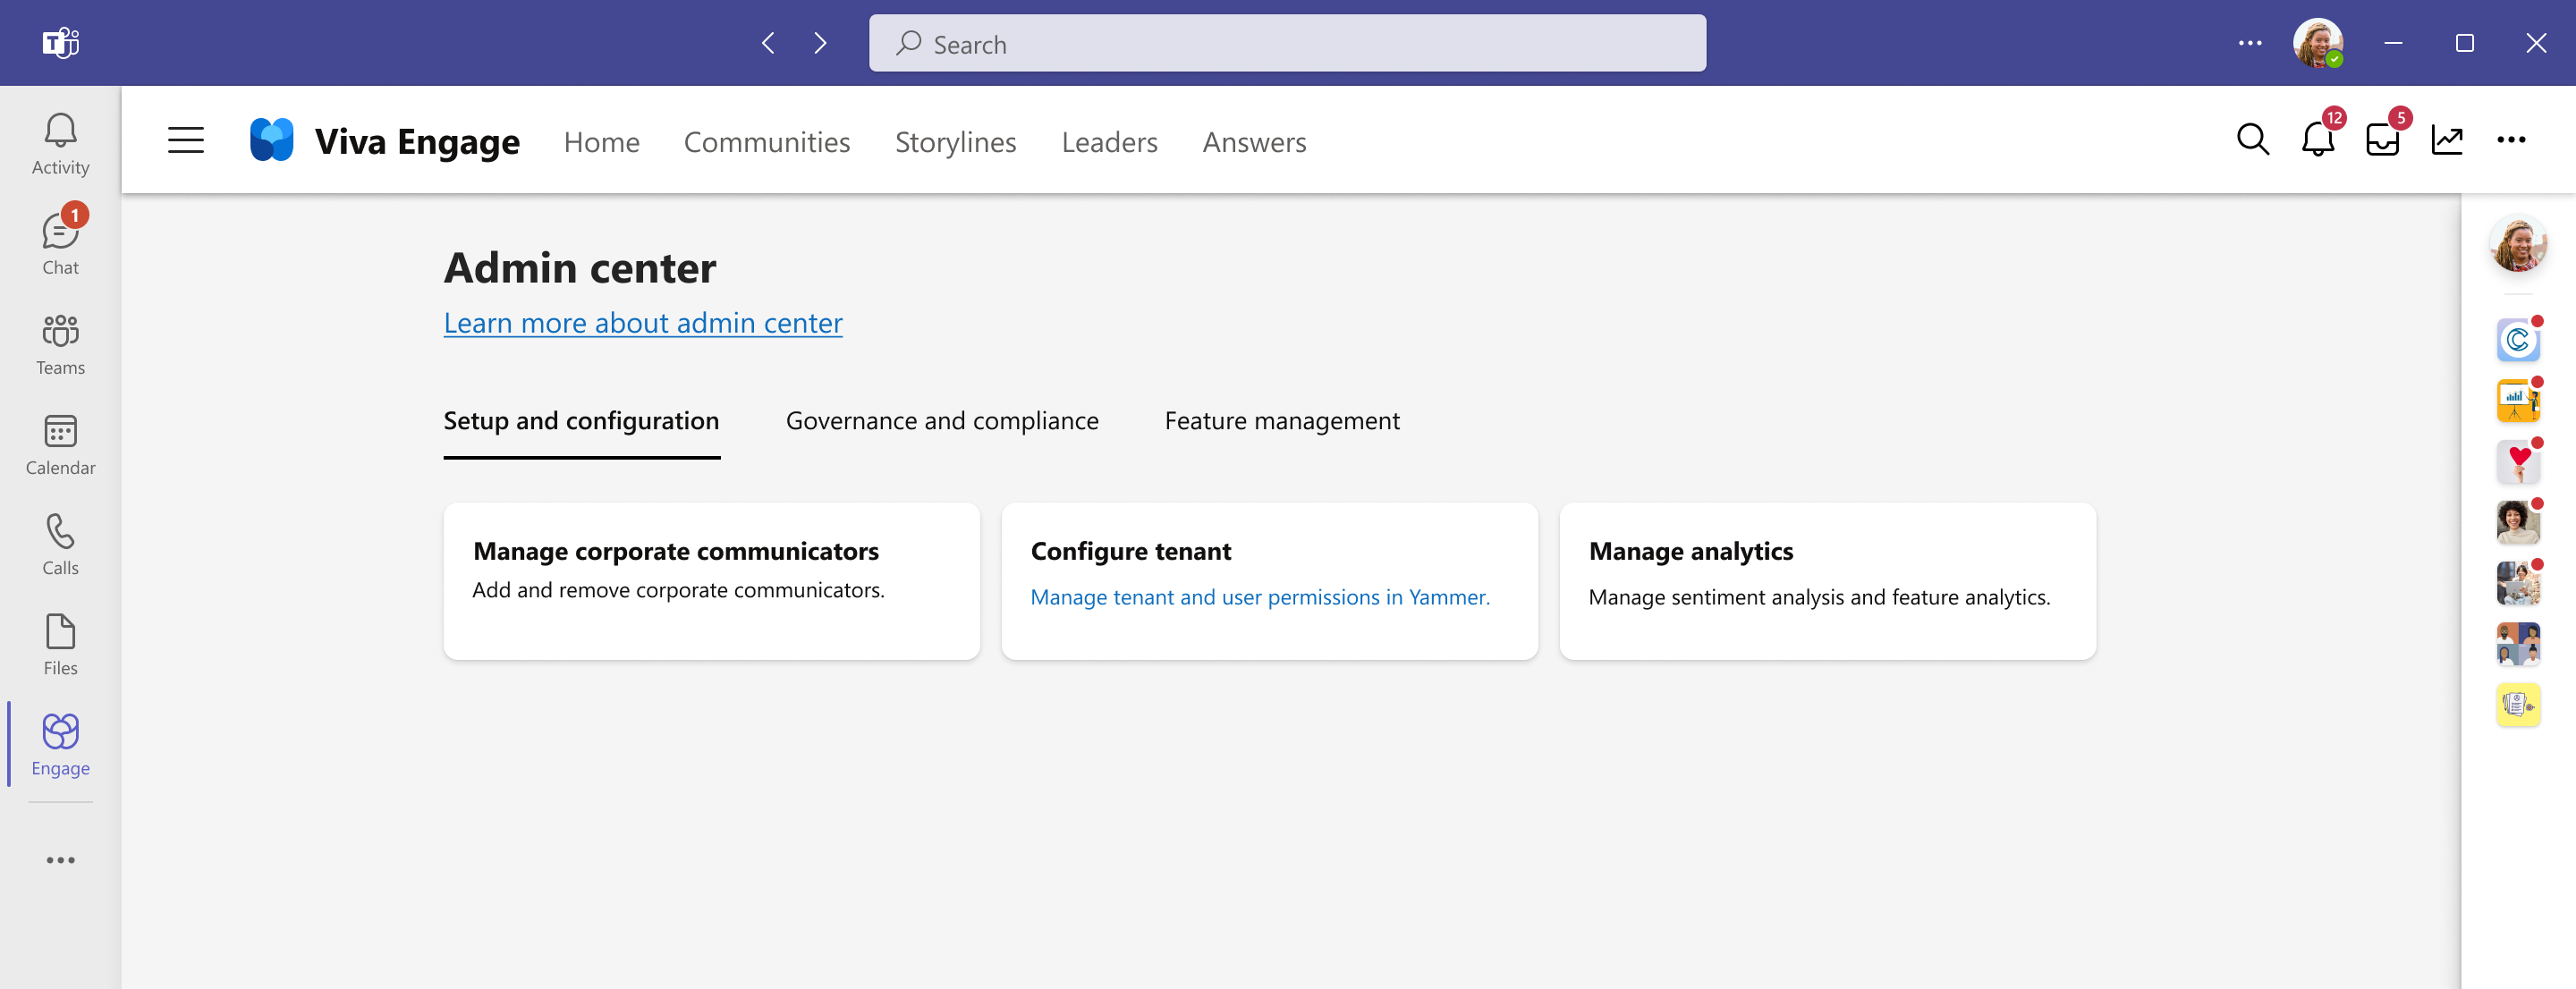 Screenshot of the Viva Engage admin center experience for admins.